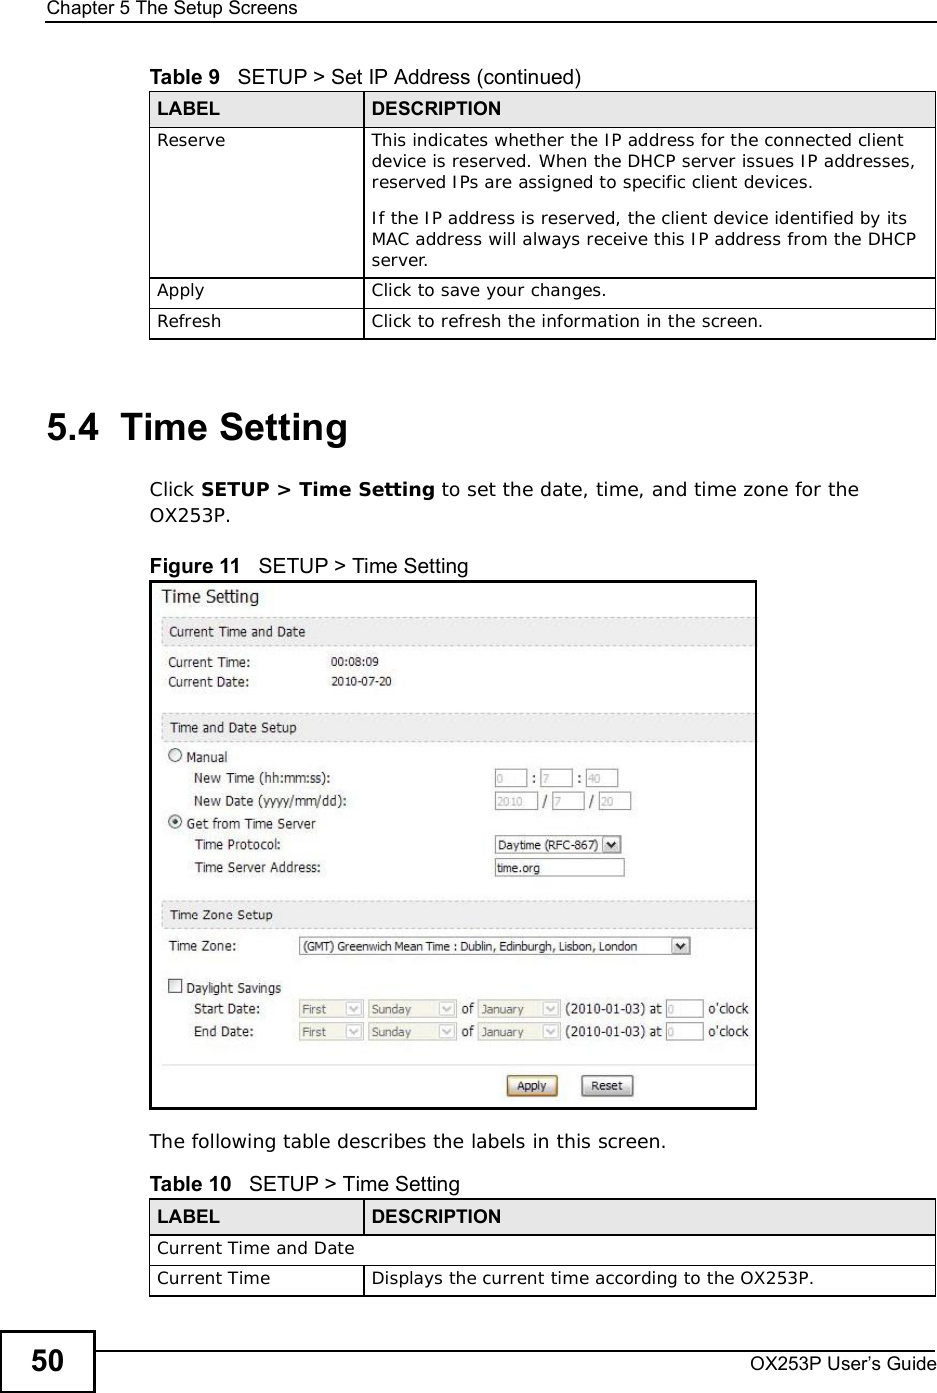 Chapter 5The Setup ScreensOX253P User’s Guide505.4  Time SettingClick SETUP &gt;Time Setting to set the date, time, and time zone for the OX253P.Figure 11   SETUP &gt; Time SettingThe following table describes the labels in this screen. Reserve This indicates whether the IP address for the connected client device is reserved. When the DHCP server issues IP addresses, reserved IPs are assigned to specific client devices.If the IP address is reserved, the client device identified by its MAC address will always receive this IP address from the DHCP server.Apply Click to save your changes.Refresh Click to refresh the information in the screen.Table 9   SETUP &gt; Set IP Address (continued)LABEL DESCRIPTIONTable 10   SETUP &gt; Time SettingLABEL DESCRIPTIONCurrent Time and DateCurrent TimeDisplays the current time according to the OX253P.